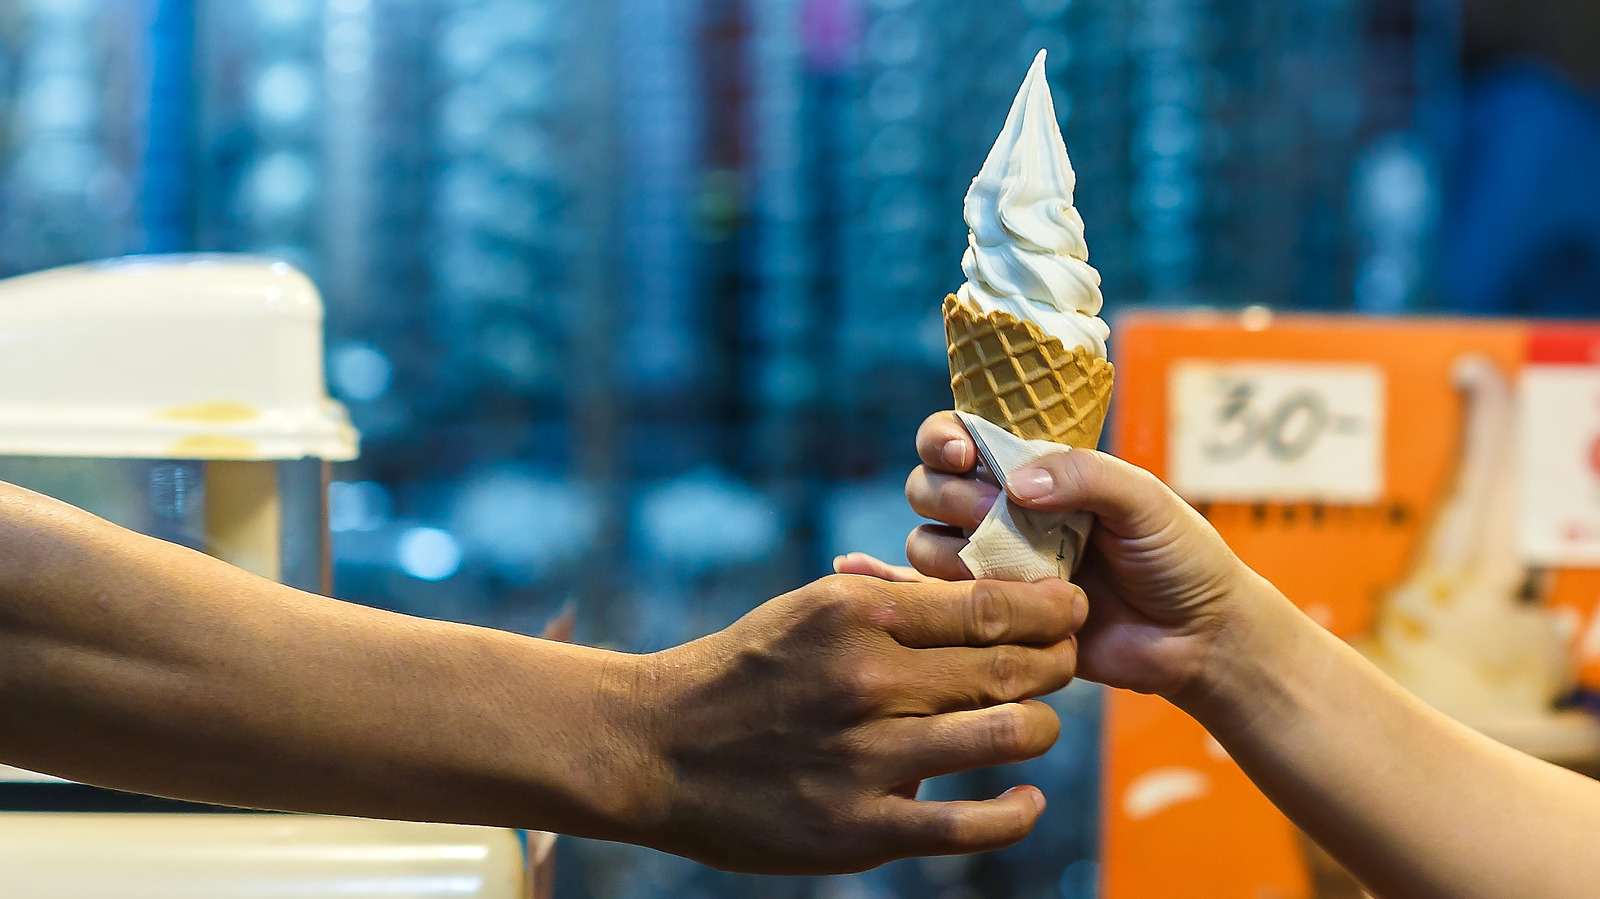 Soft Serve Ice Cream Is a Fast Food Safety Nightmare